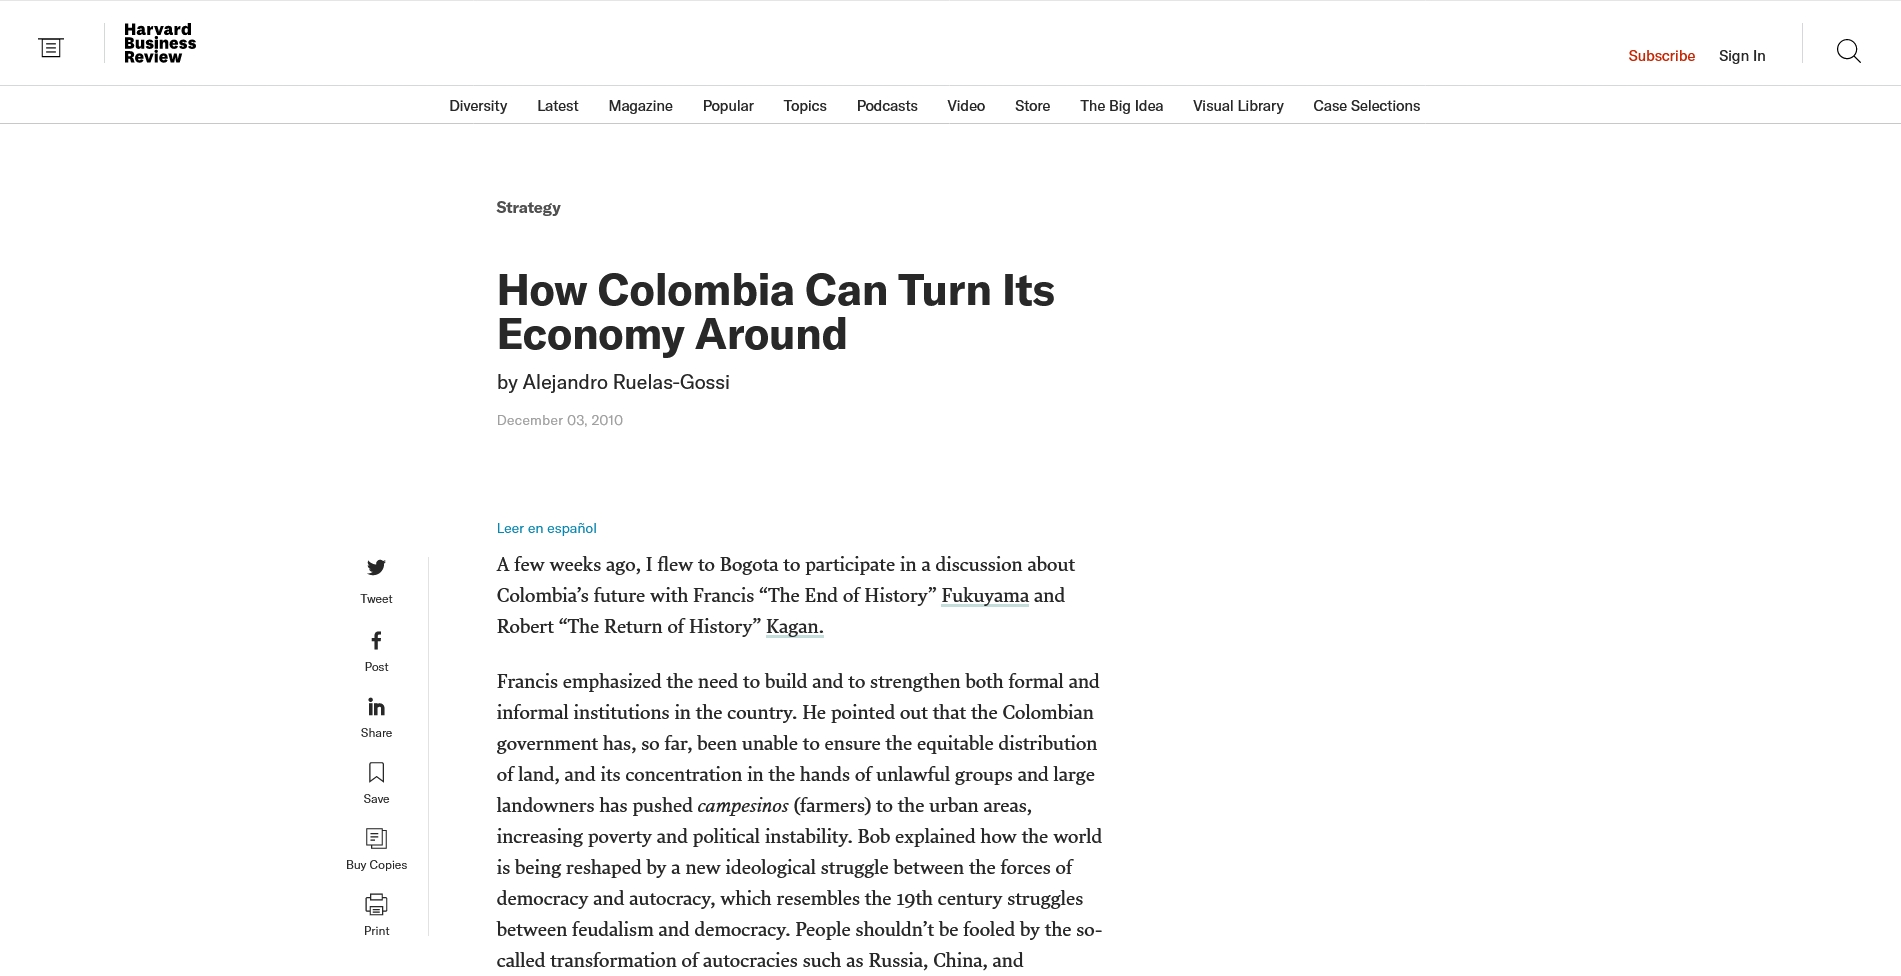 How Colombia Can Turn Its Economy Around